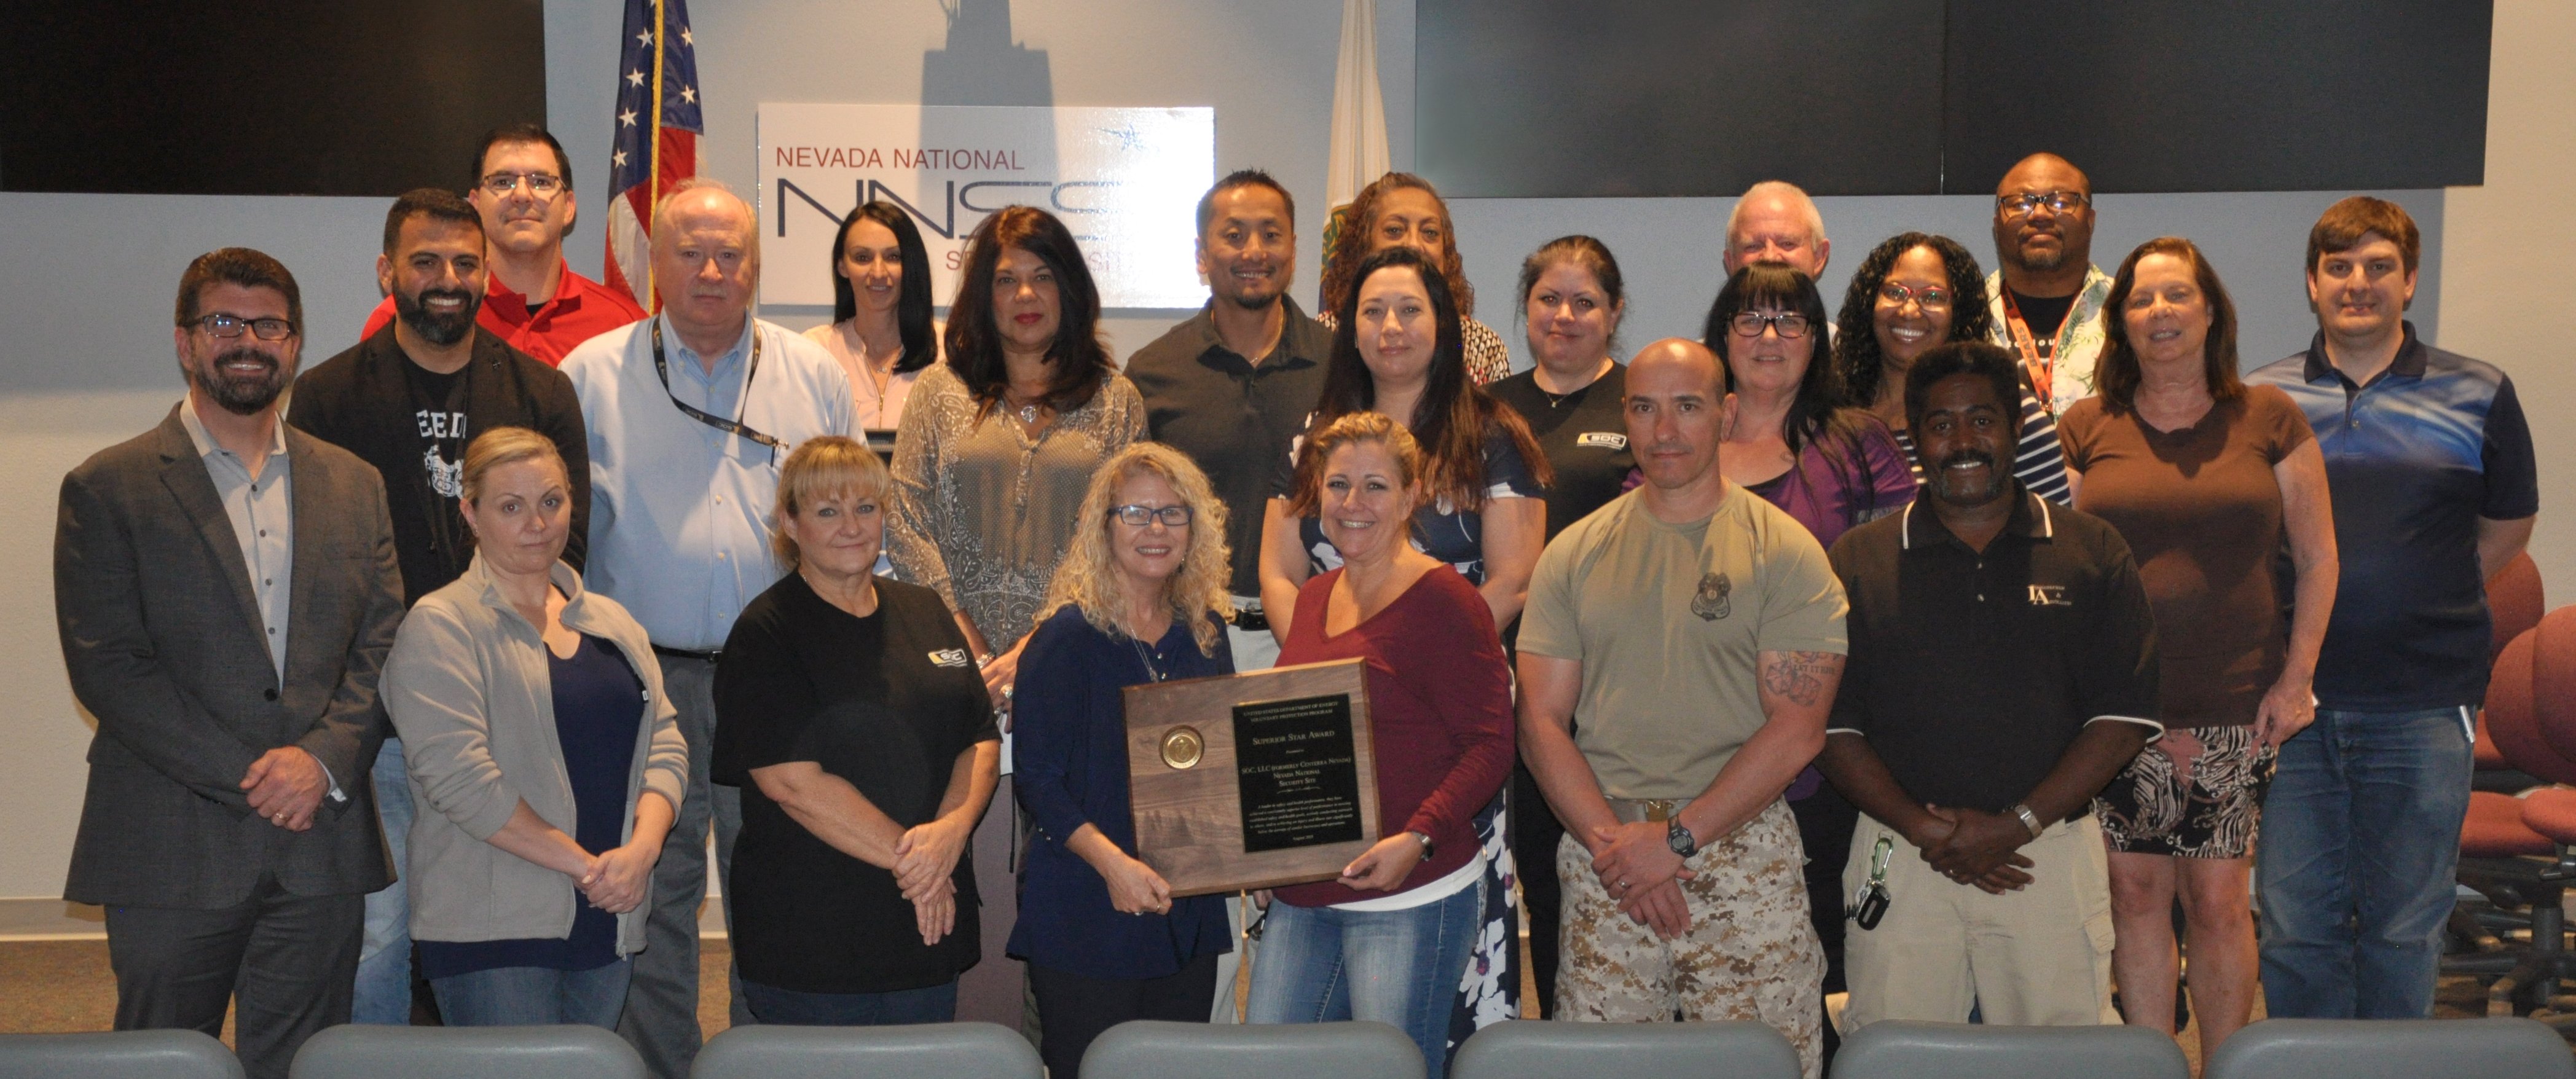 SOC at NNSS Receives Superior Star Award from Department of Energy